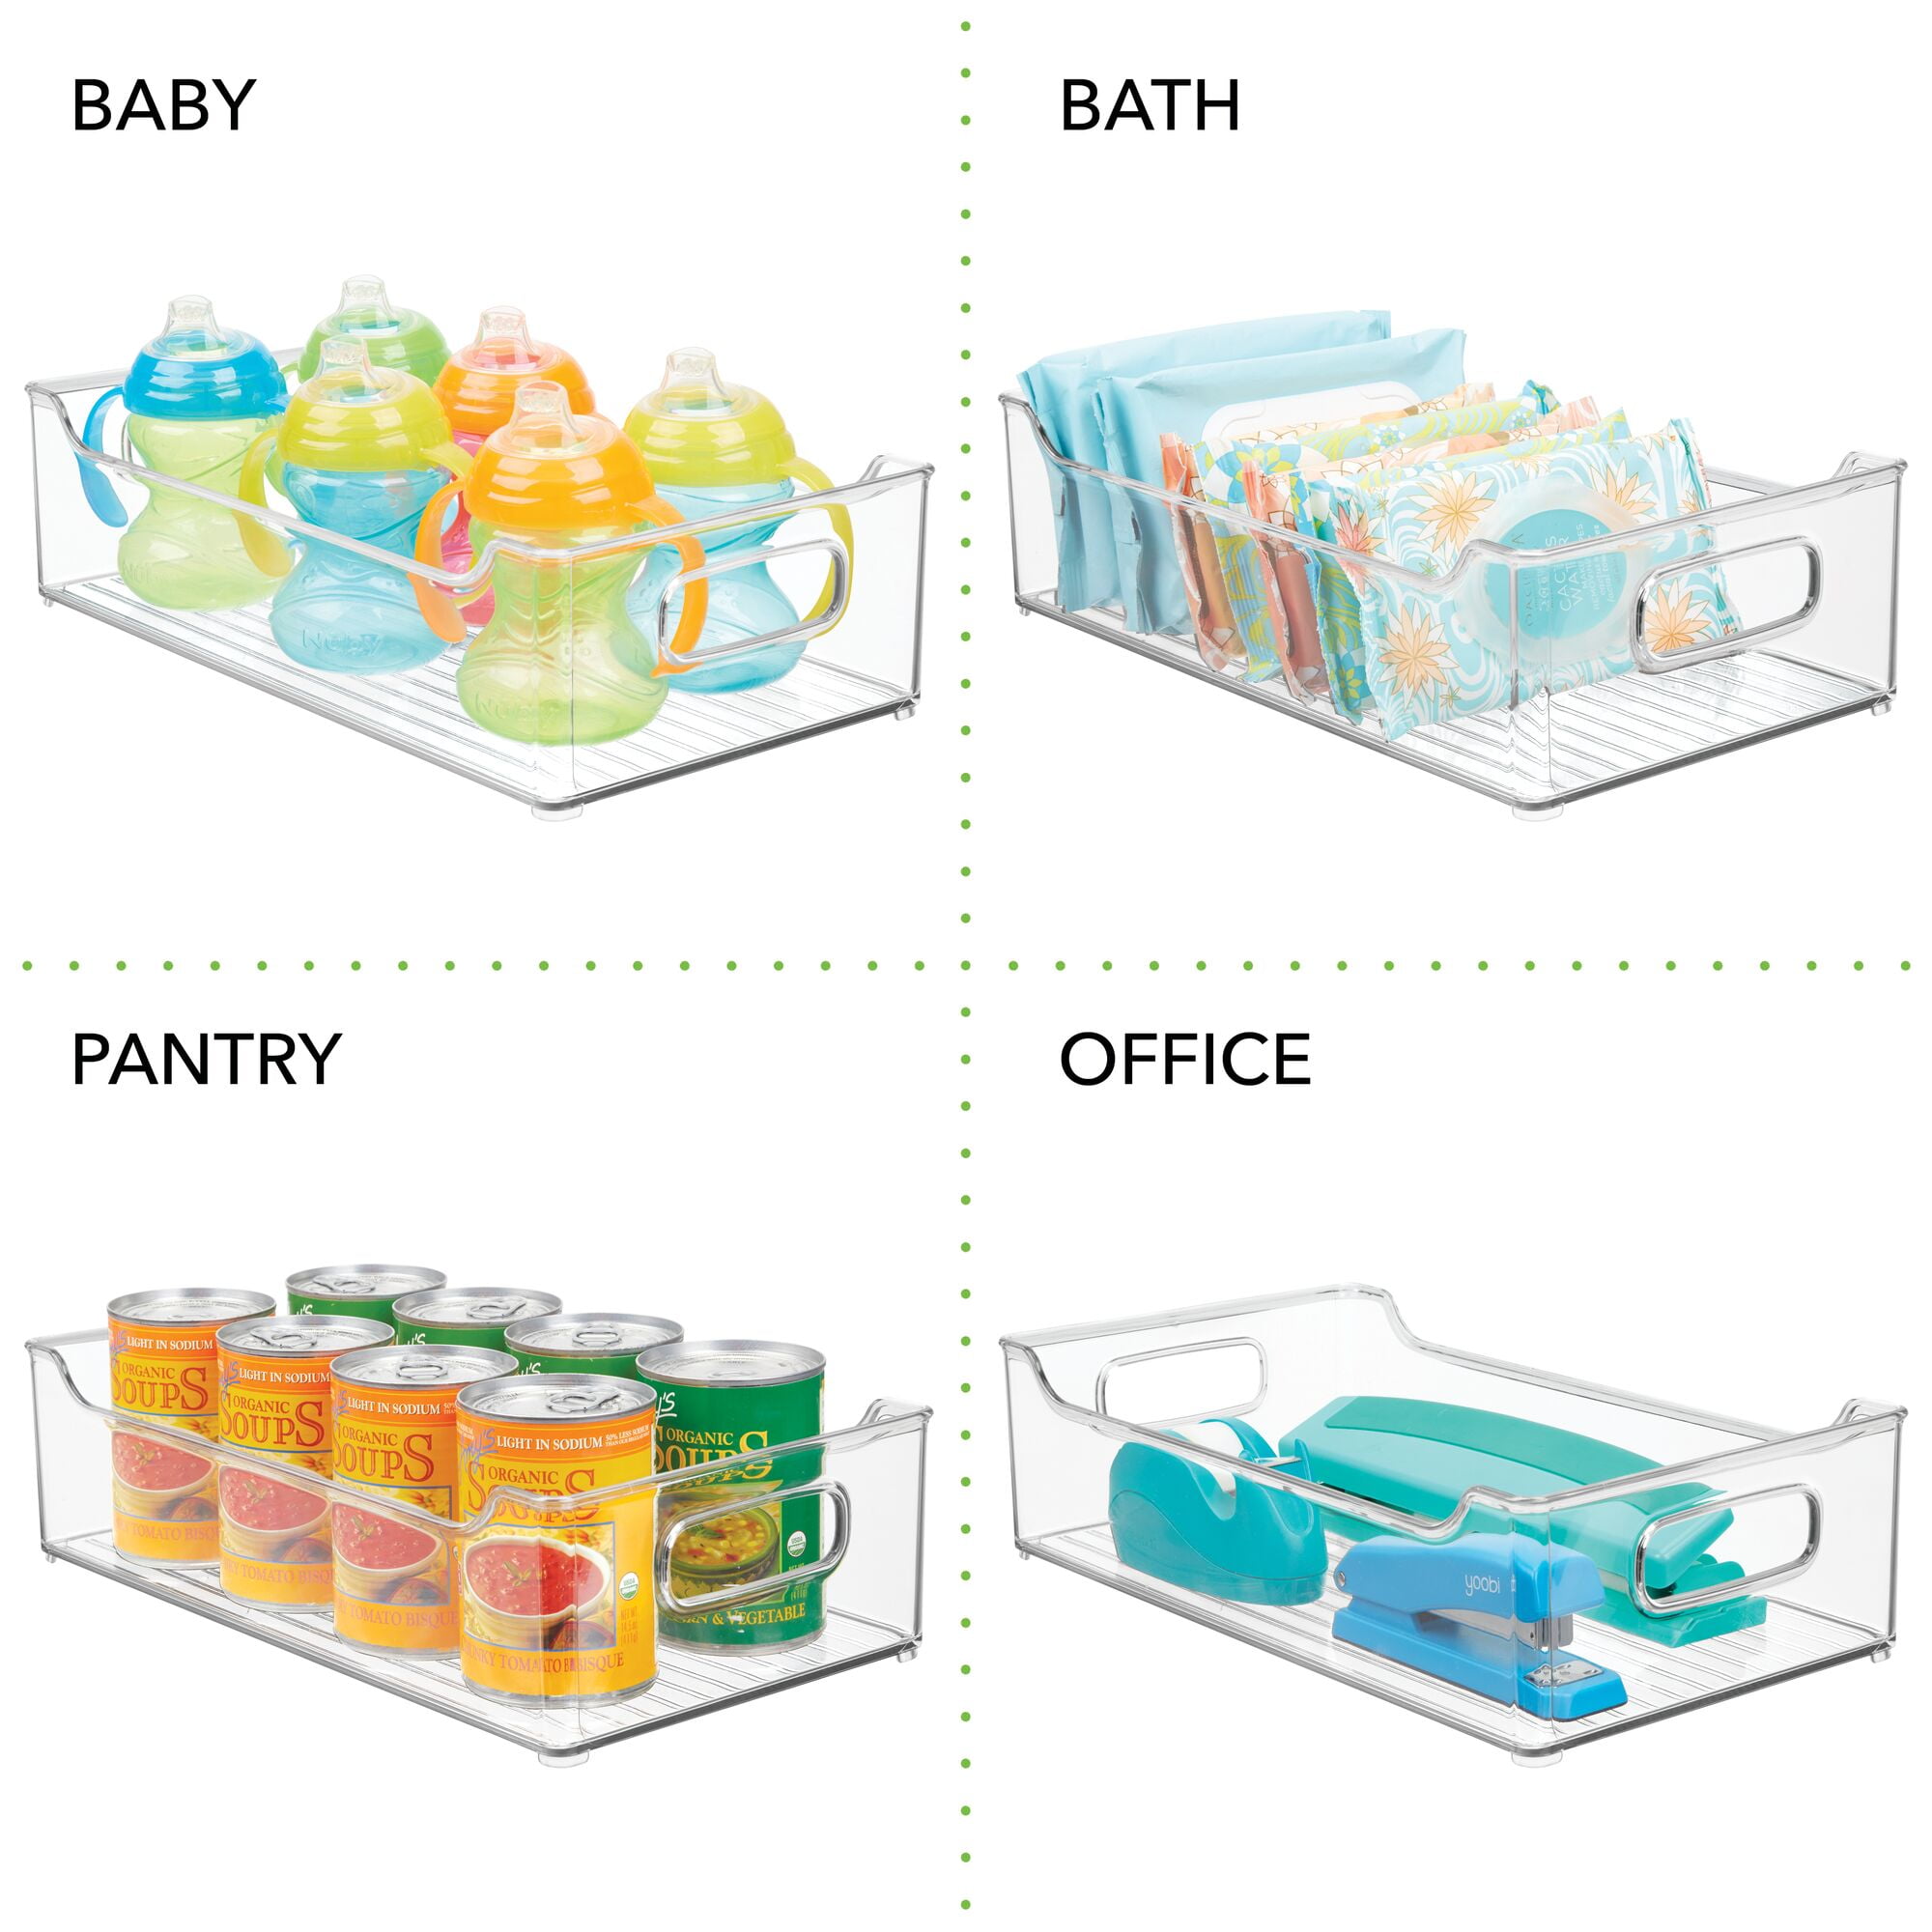 mDesign Small Plastic Nursery Storage Container Bins with Handles for  Organization in Cabinet, Closet or Cubby Shelves - Organizer for Baby Food